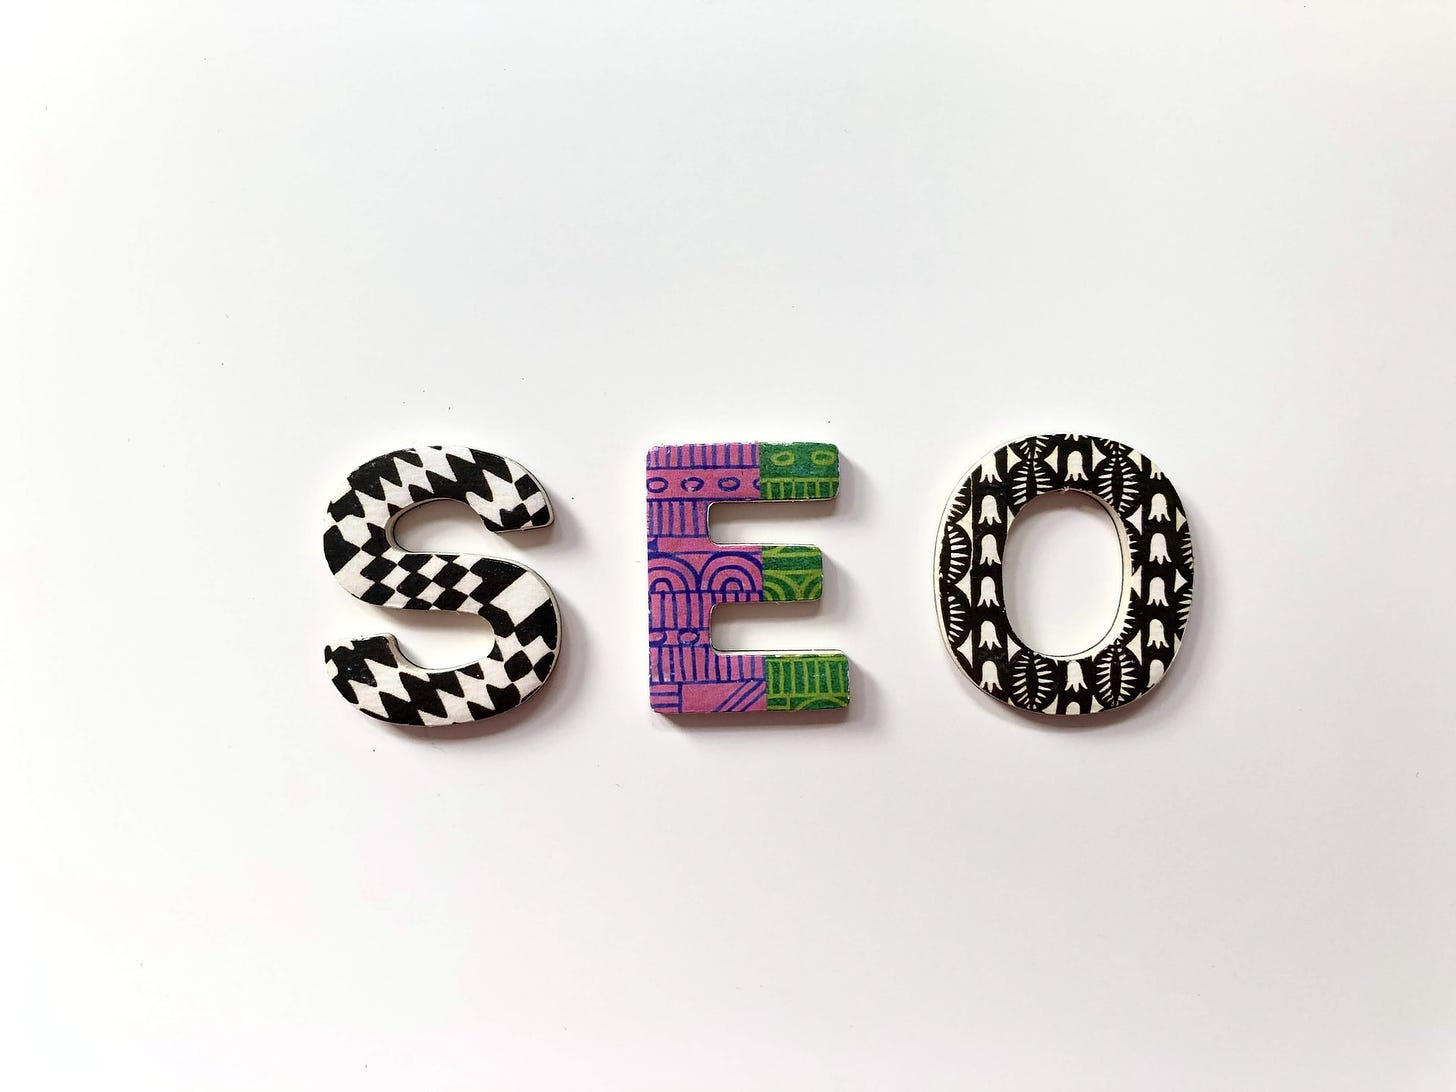 "SEO" written in colorful embroidery on a plain white backdrop